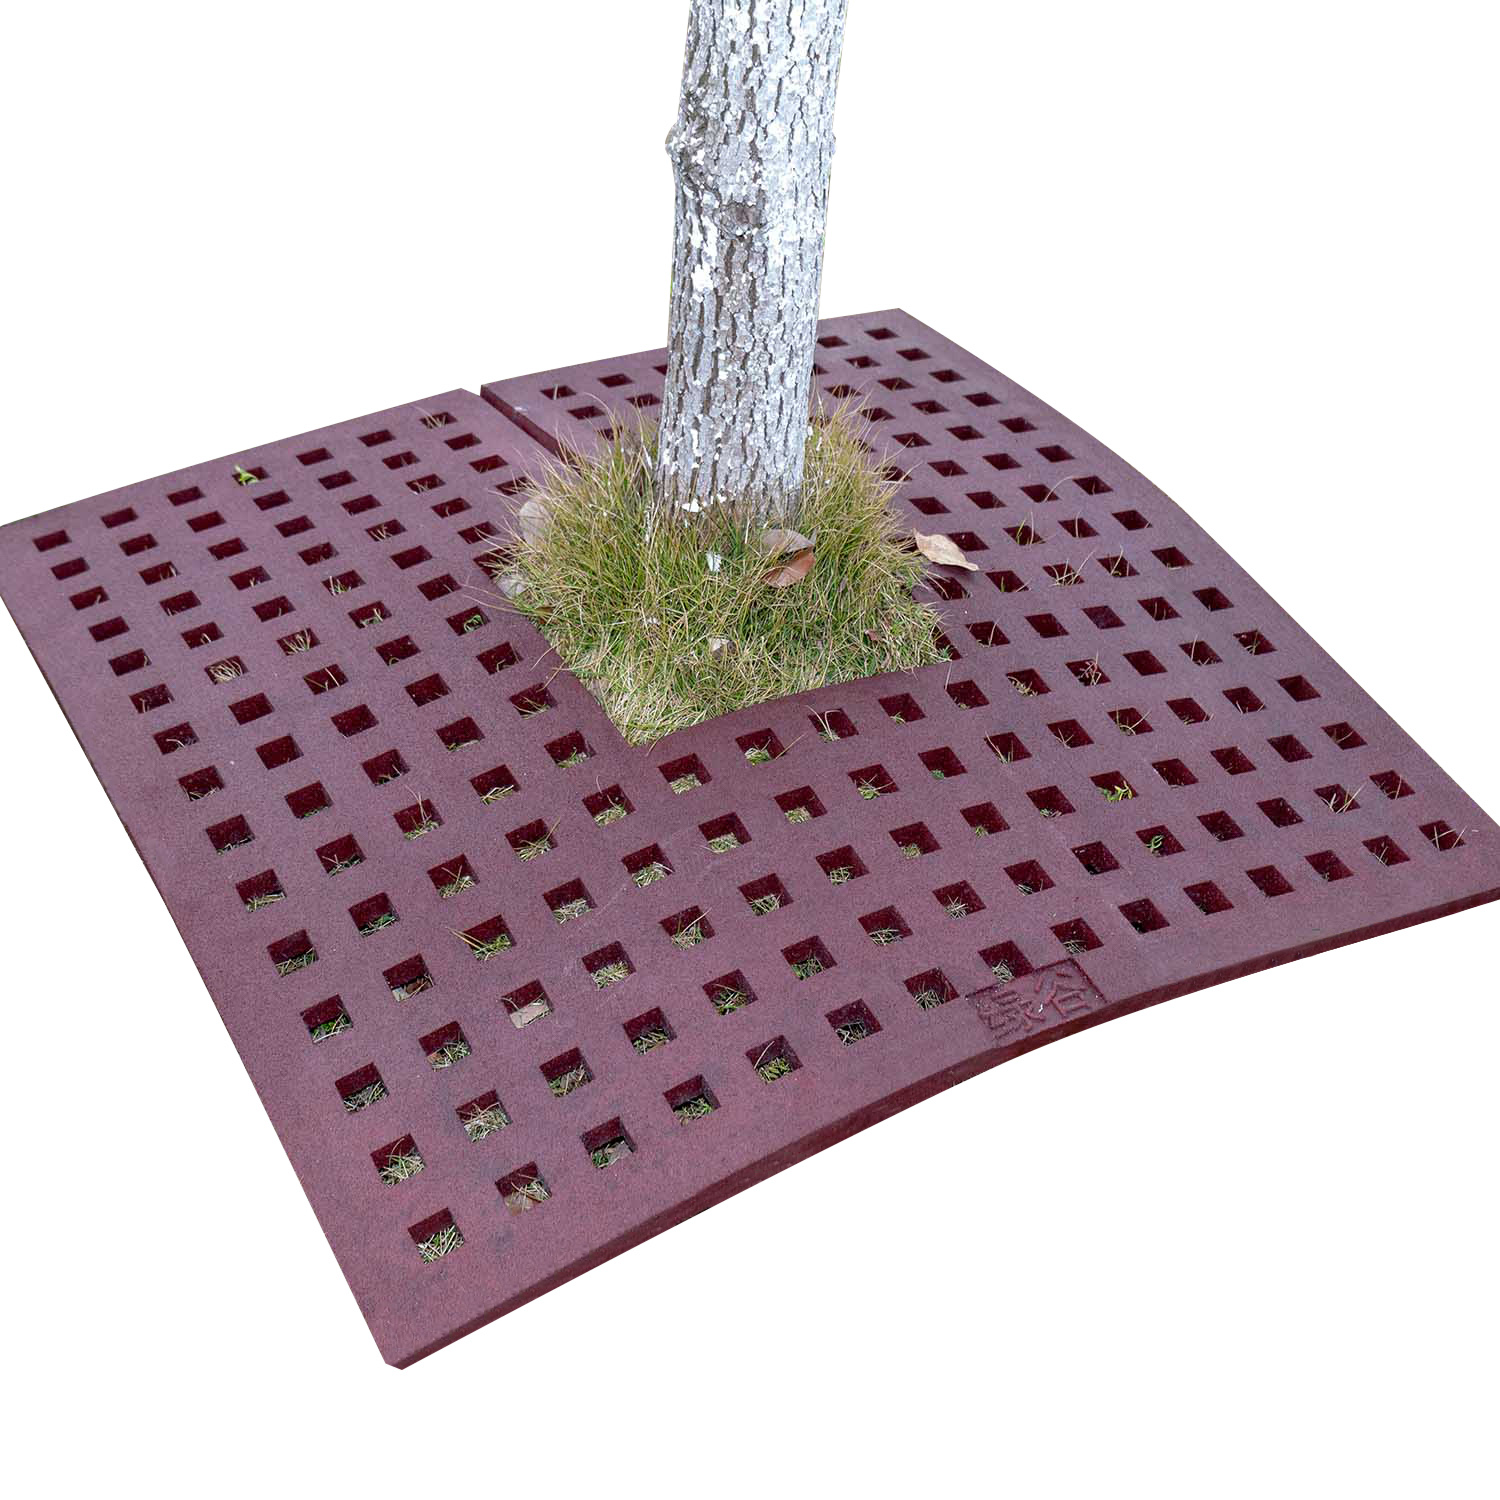 Square Tree Ring Rubber Tiles